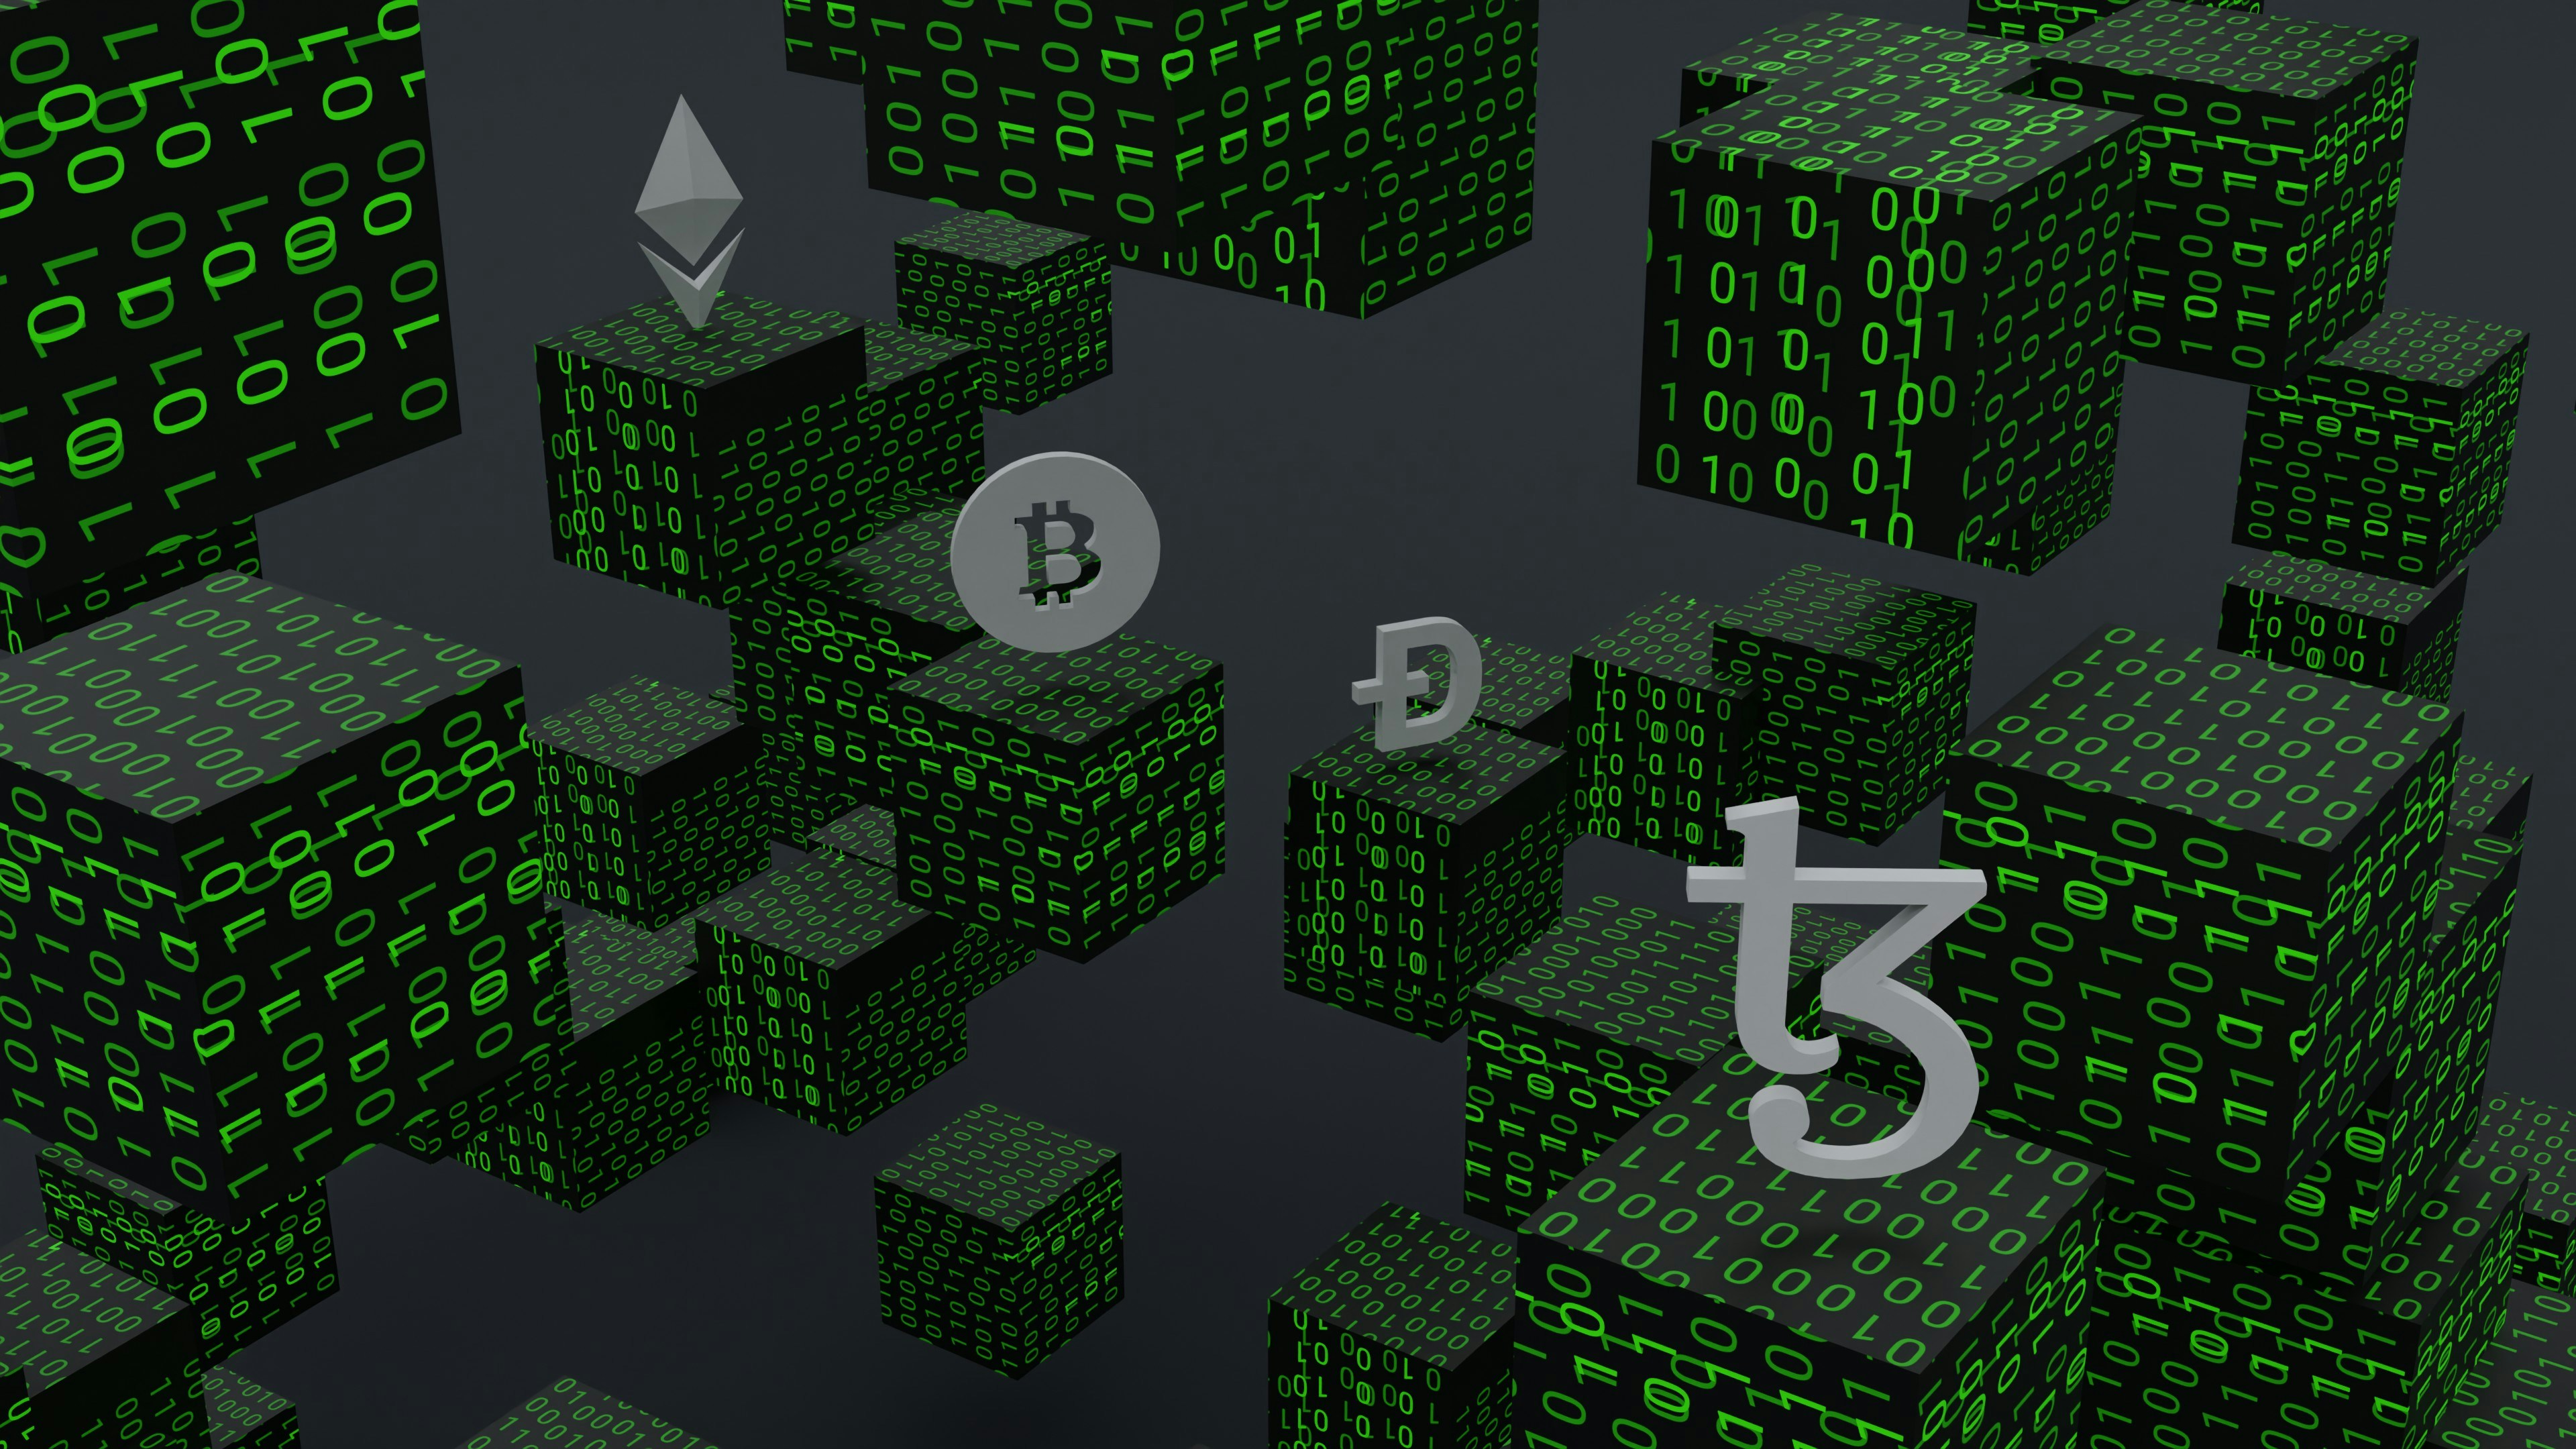 3D illustration of Tezos coin, bitcoin, Ehtereum, and dogecoin surrounded by binary code. Tezos is a blockchain designed to evolve. work 👇: Email: shubhamdhage000@gmail.com